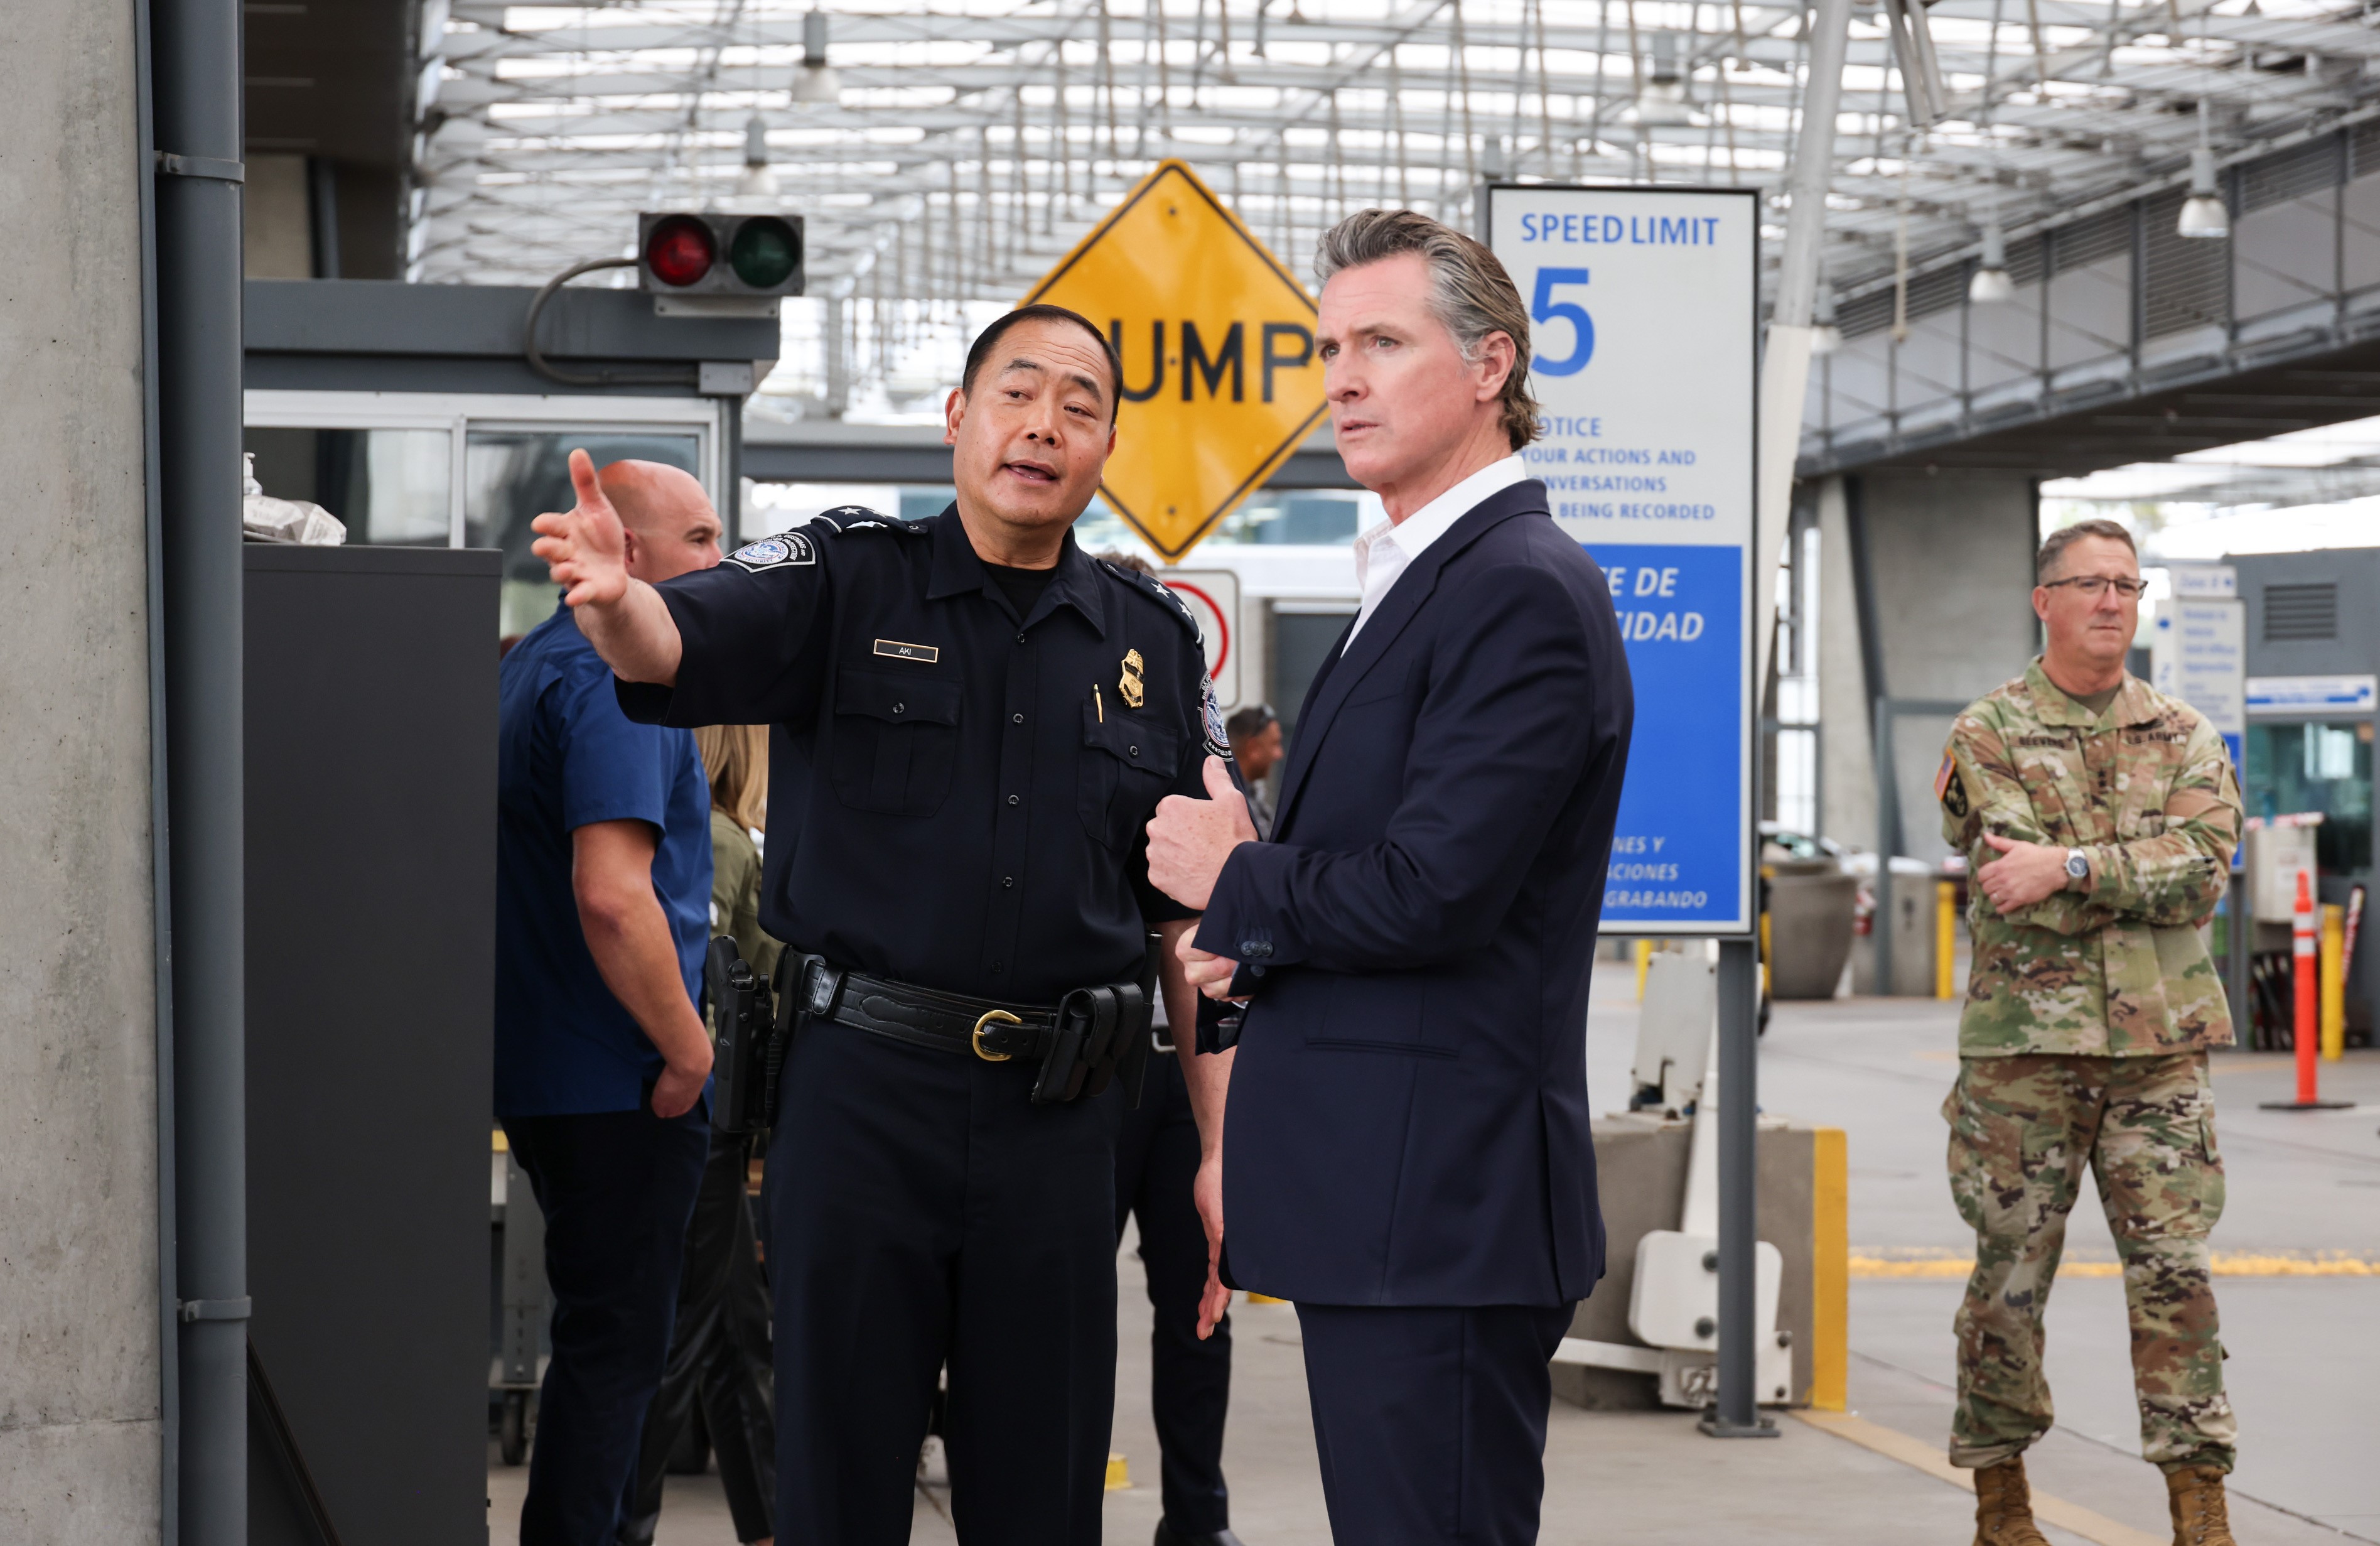 Governor Newsom looking off in distance while speaking with a uniformed officer in black clothing